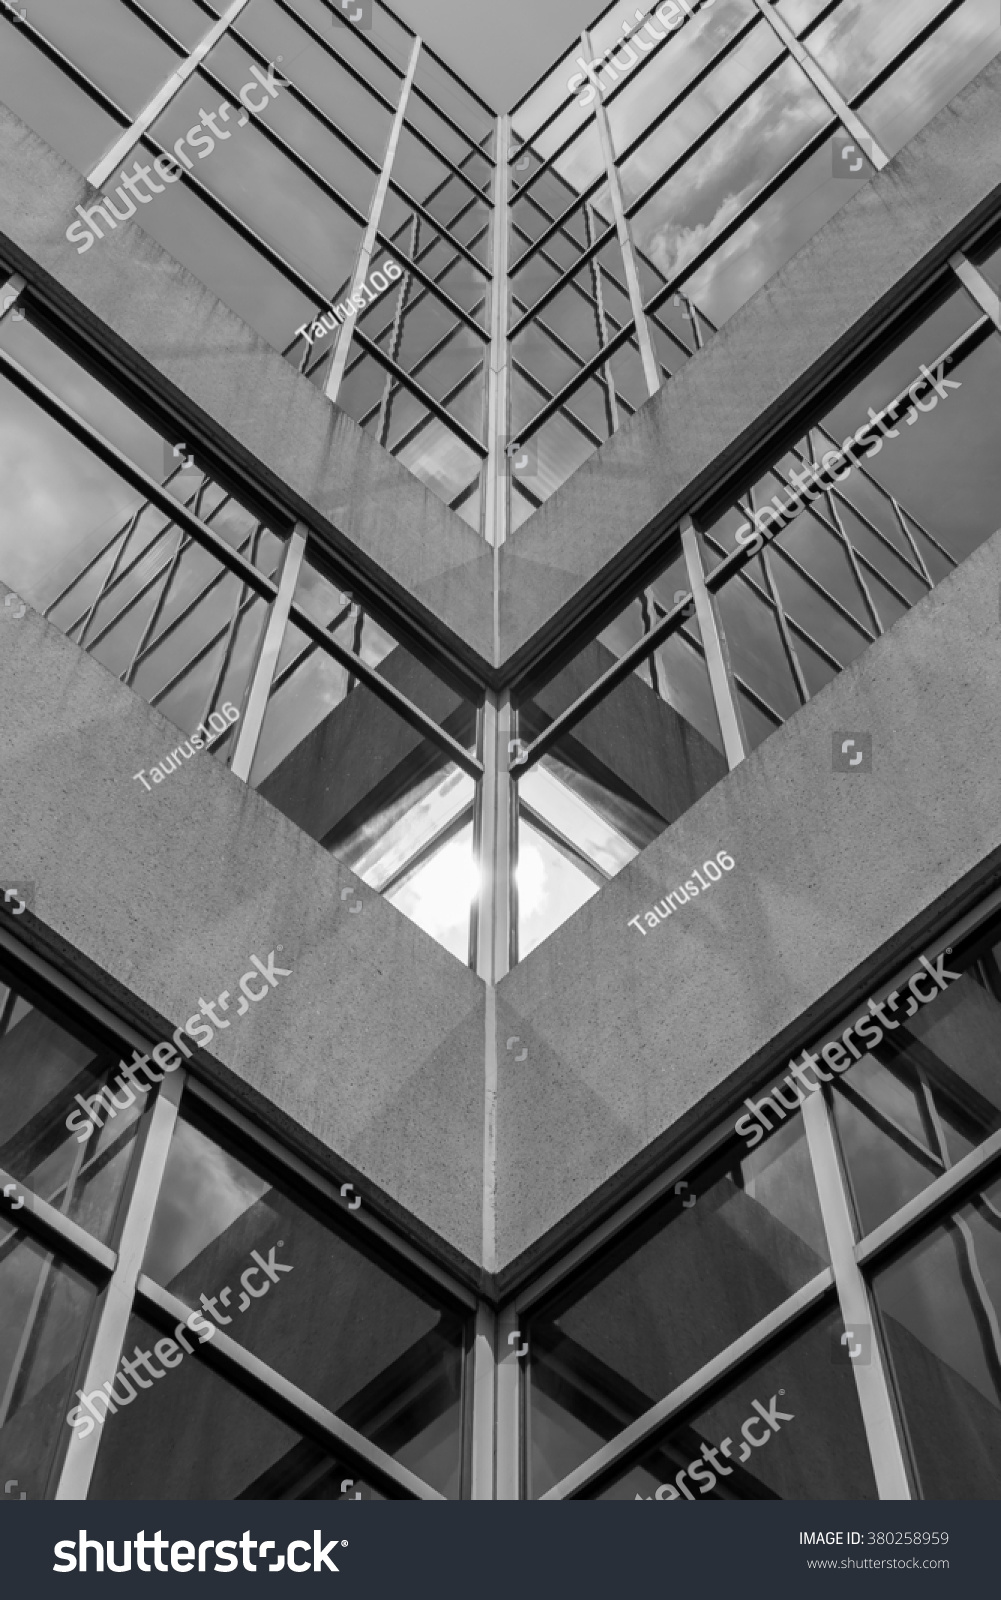 Urban Geometry, looking up to building. Modern architecture black and white, concrete and glass.  Abstract architectural design. Inspirational, artistic image BW. Artistic image and point of view. #380258959